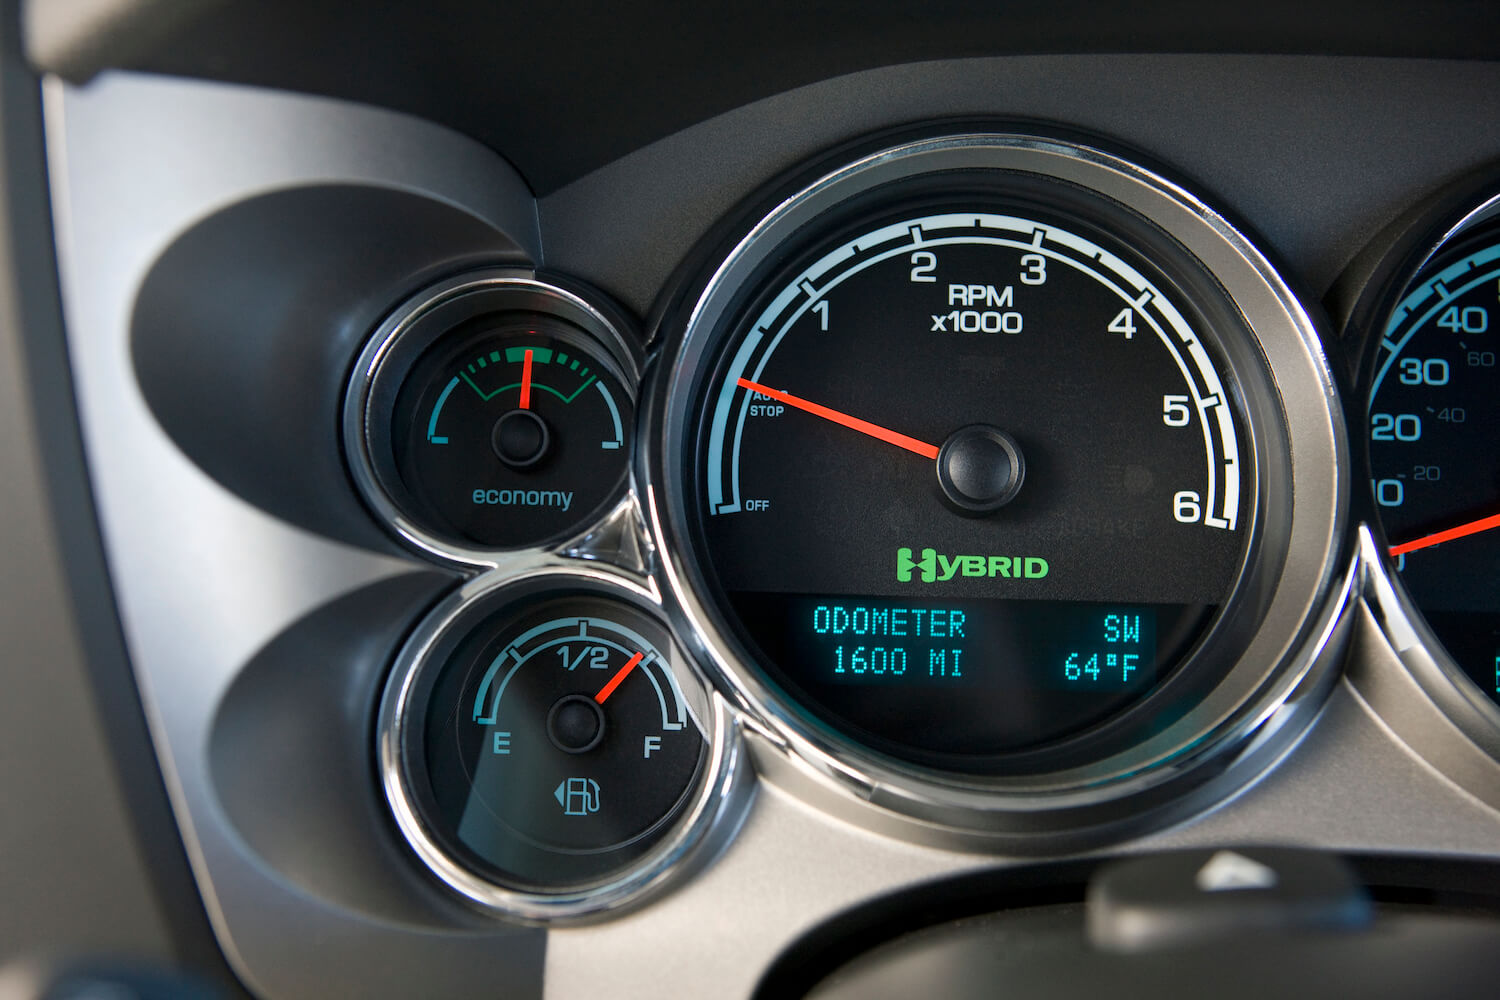 Closeup of the hybrid icon in the tachometer of a 2012 GMC Sierra full-size pickup truck with the two-mode CVT transmission.